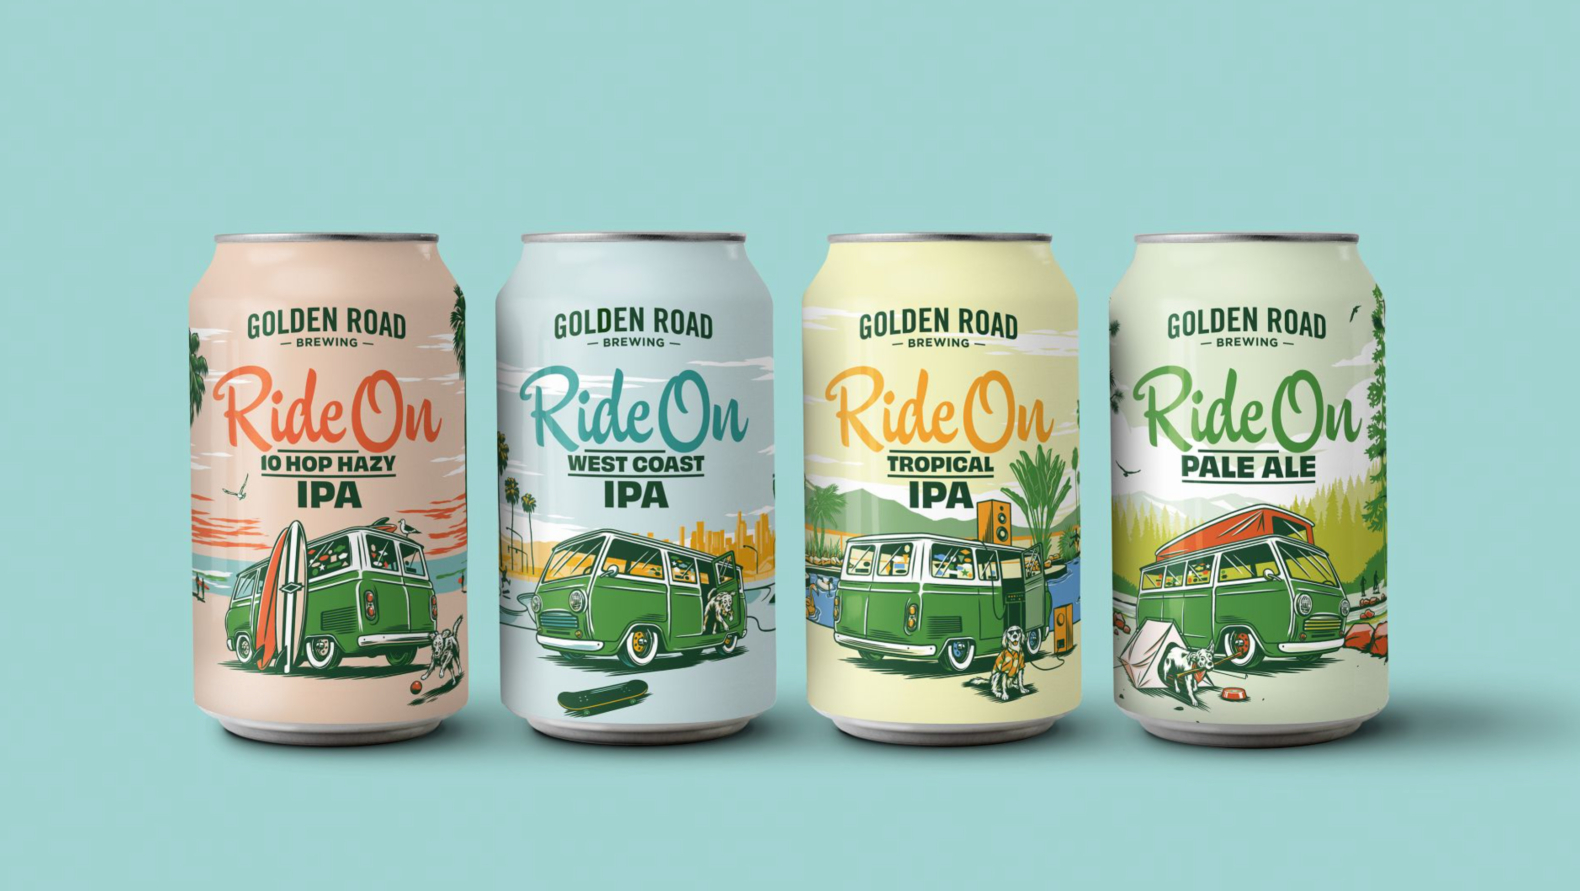 Four cans of Golden Road Ride On beer against a light aqua background. Going left to right: Pink can of 10 Hop Hazy IPA, light blue can of West Coast IPA, yellow can of Tropical IPA, and a light green can of Pale Ale. Details of what is in each can’s illustrations can be found in earlier images on this page.